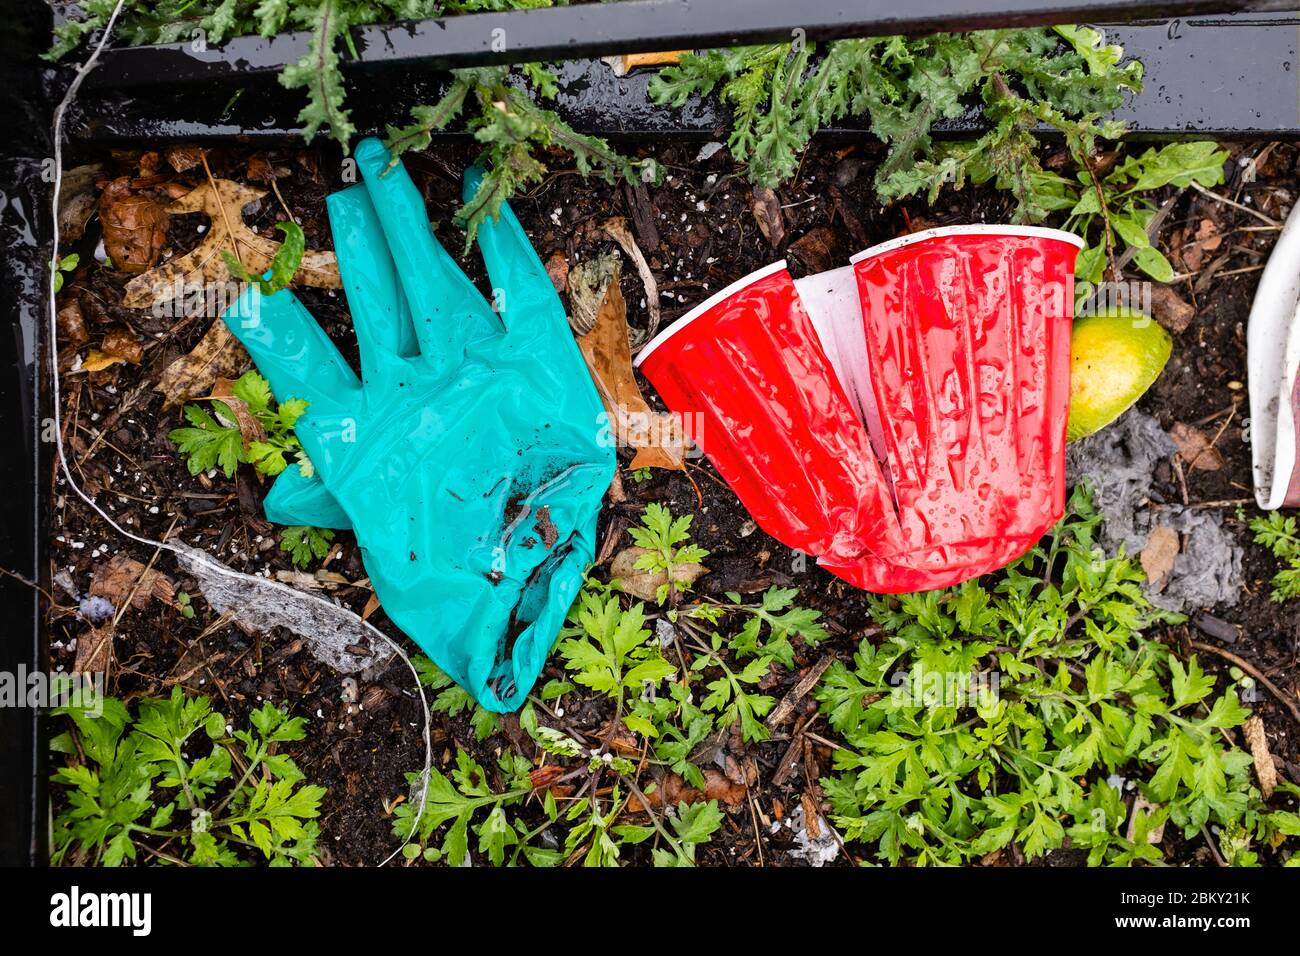 Brooklyn, NY - 23 March 2020. Discarded surgical gloves are a familiar sight in the streets and on the sidewalks. Stock Photo